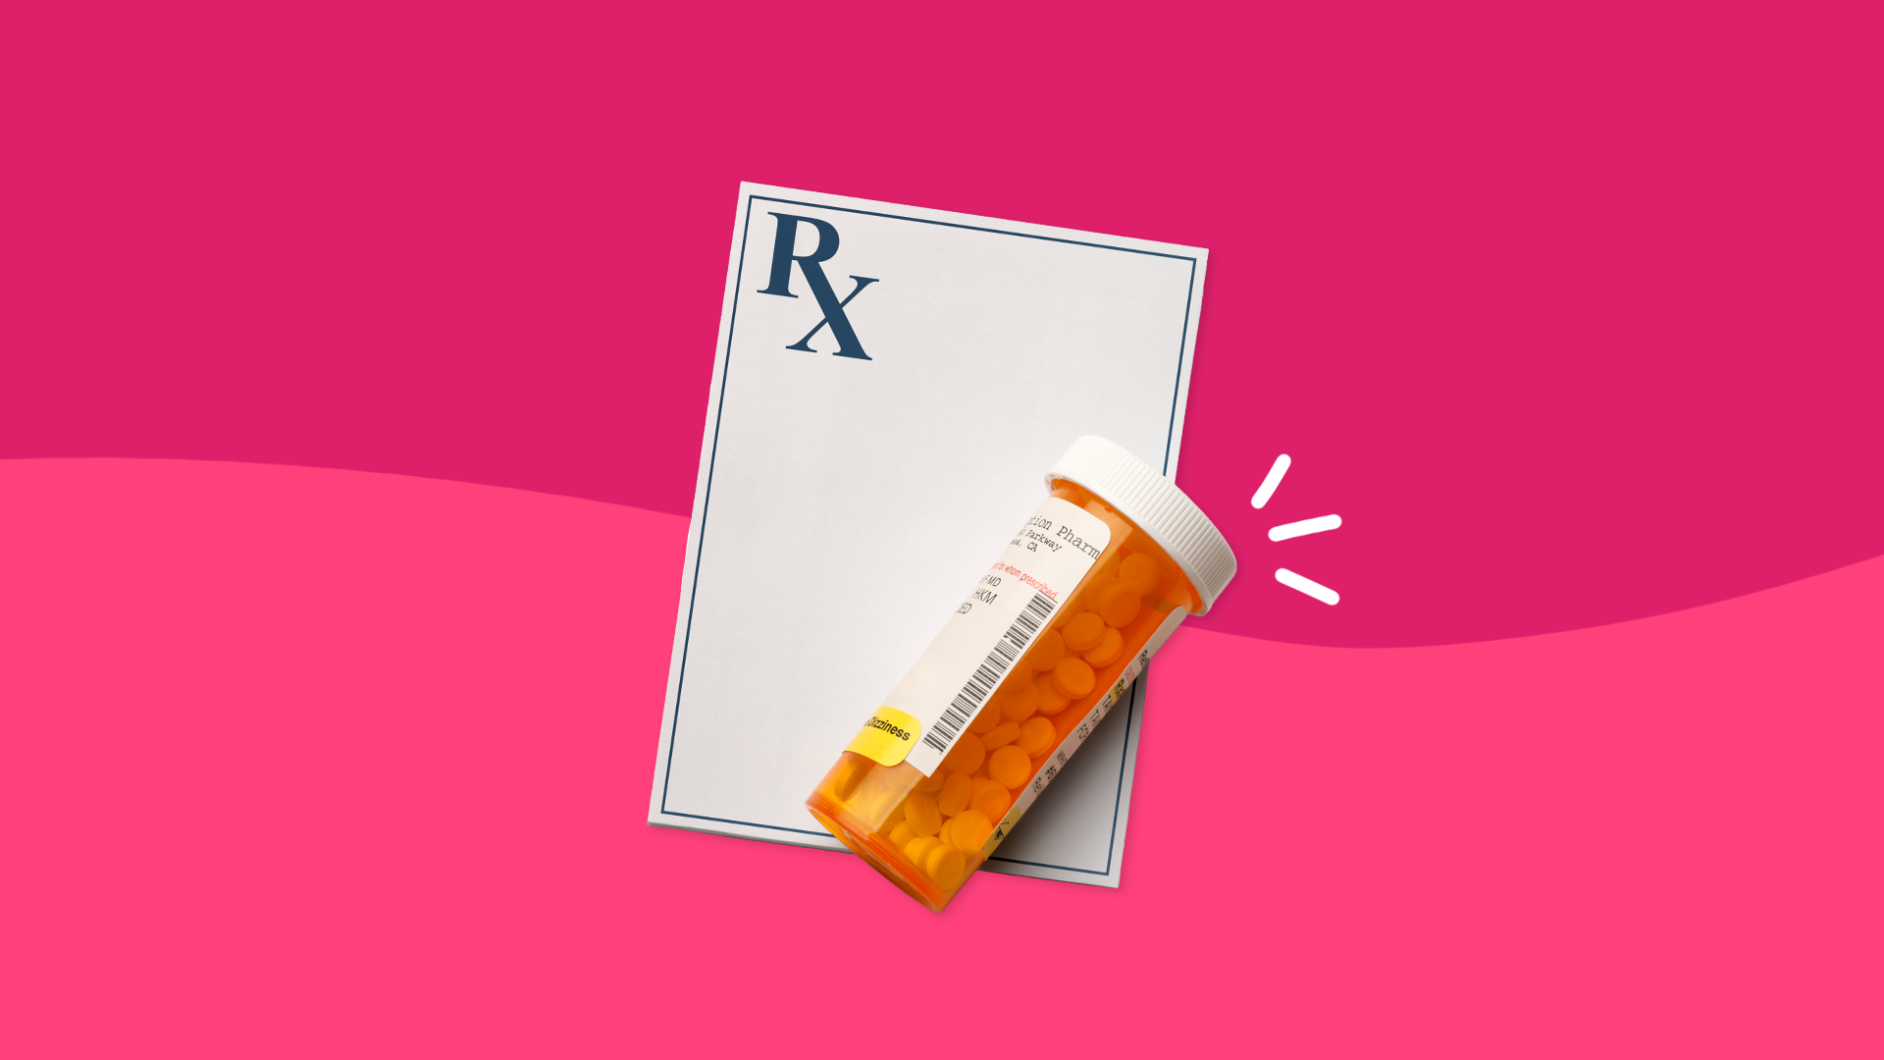 Rx Pad and bottle representing side effects of methylprednisolone